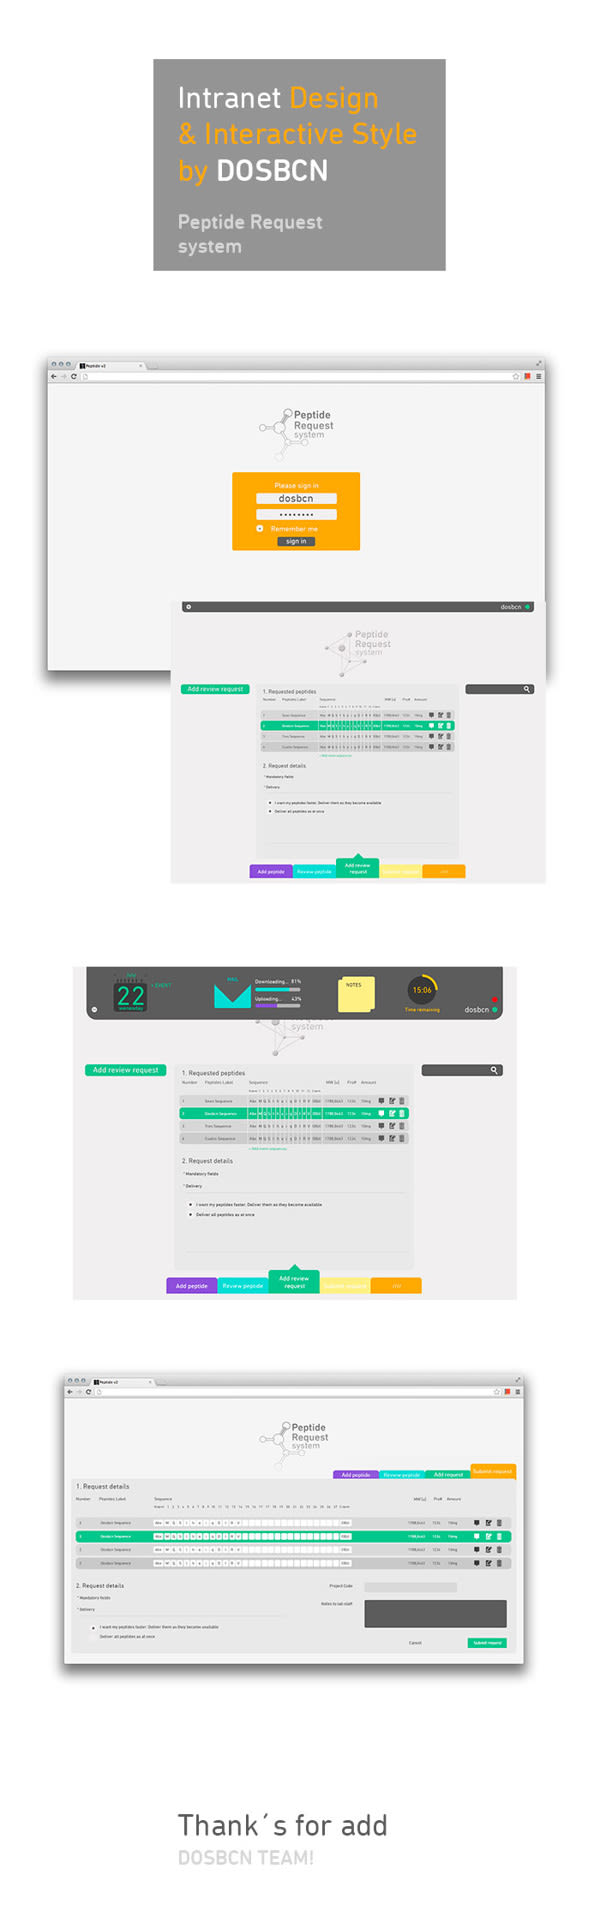 Intranet Design & Interactive Style by DOSBCN -1